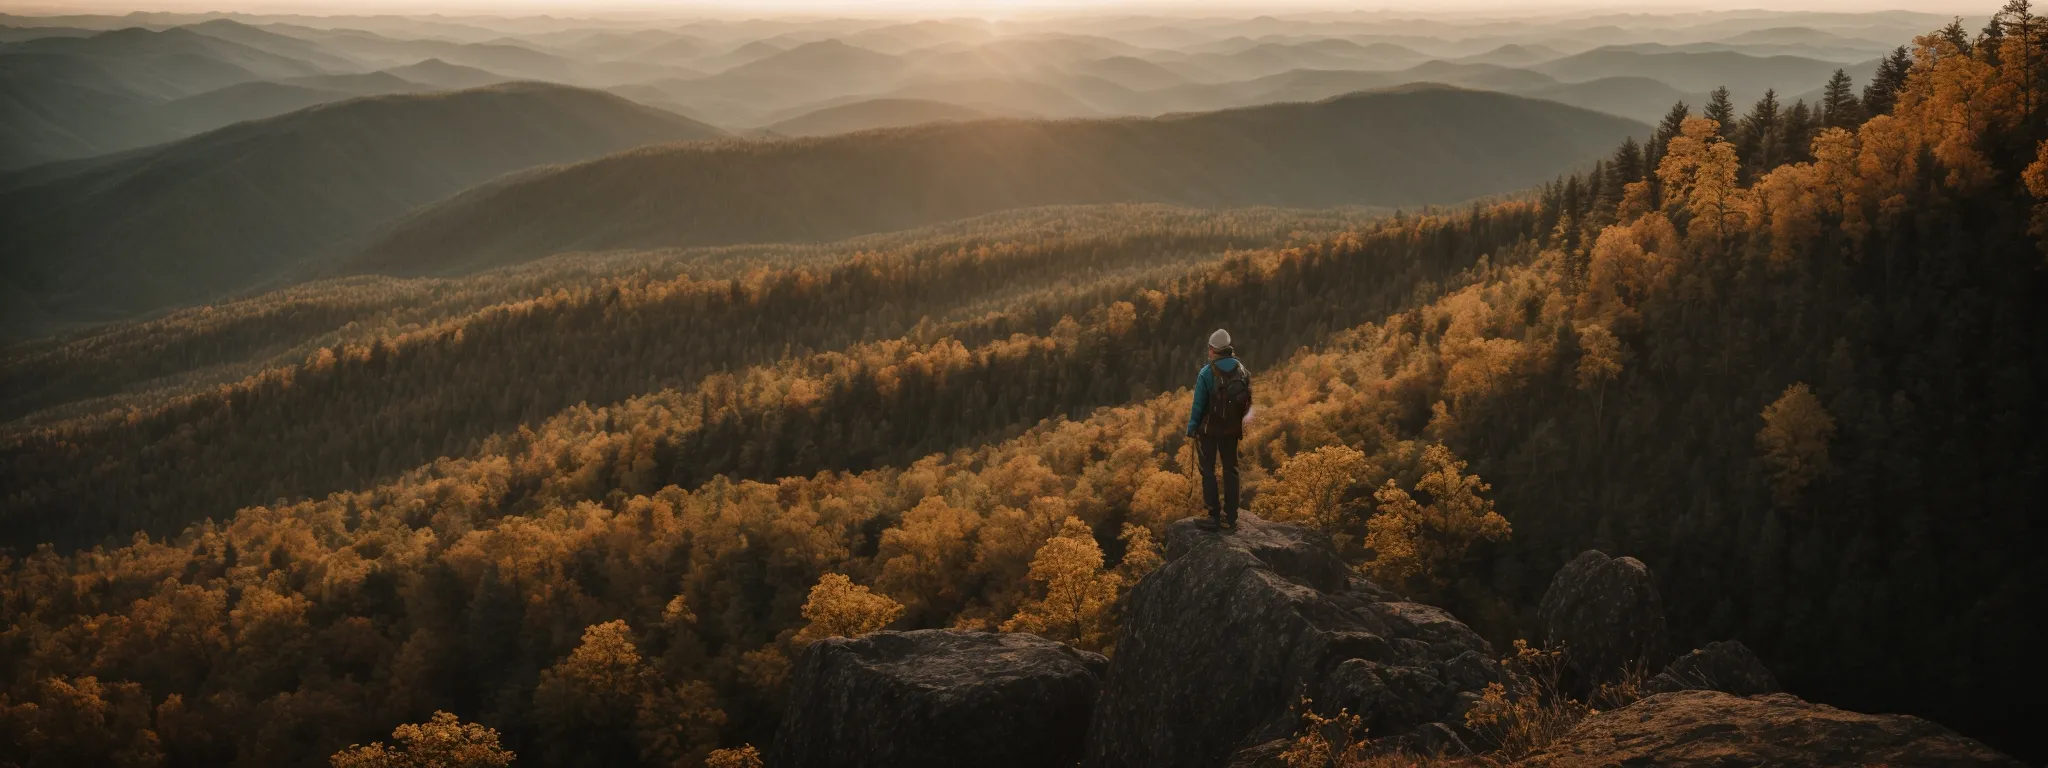 a person stands atop a mountain peak, looking out over a vast forested landscape at sunrise.